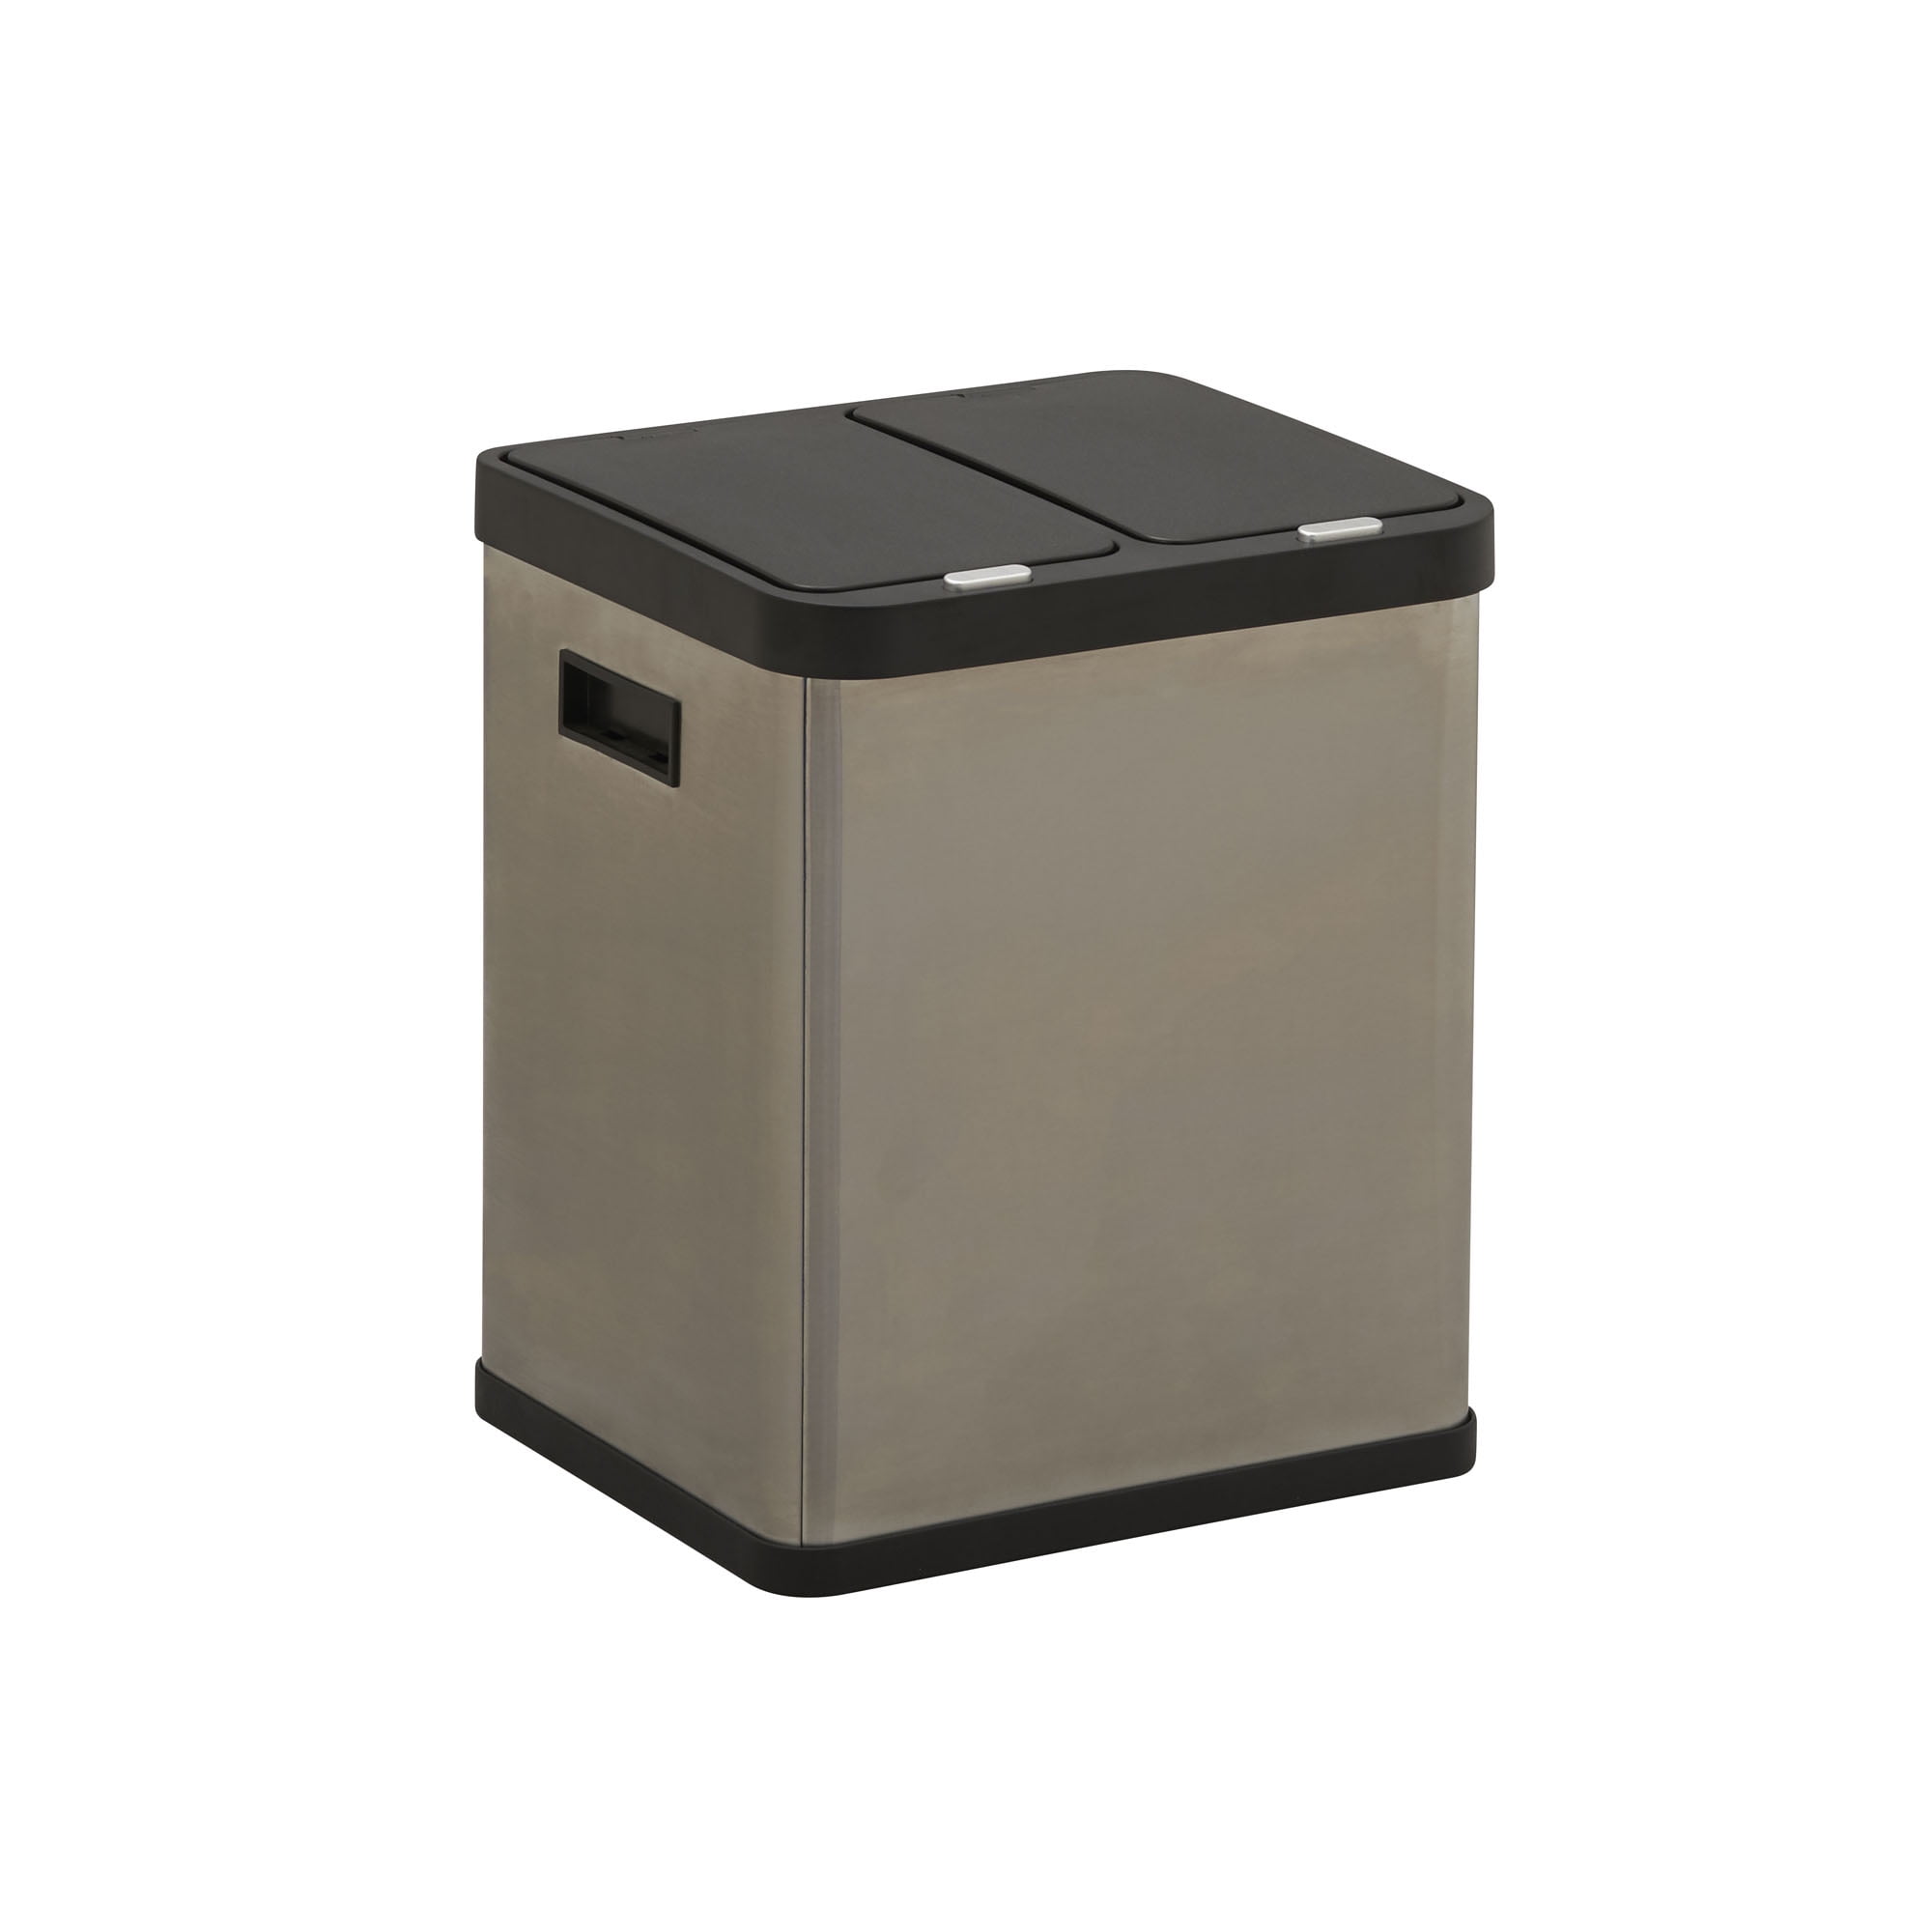 S AFSTAR Kitchen Trash Cans Dual Compartment, 2 x 8 Gal Garbage Can W/2  Deodorizer Compartments, Soft Close Lids & Removable Buckets, Brushed